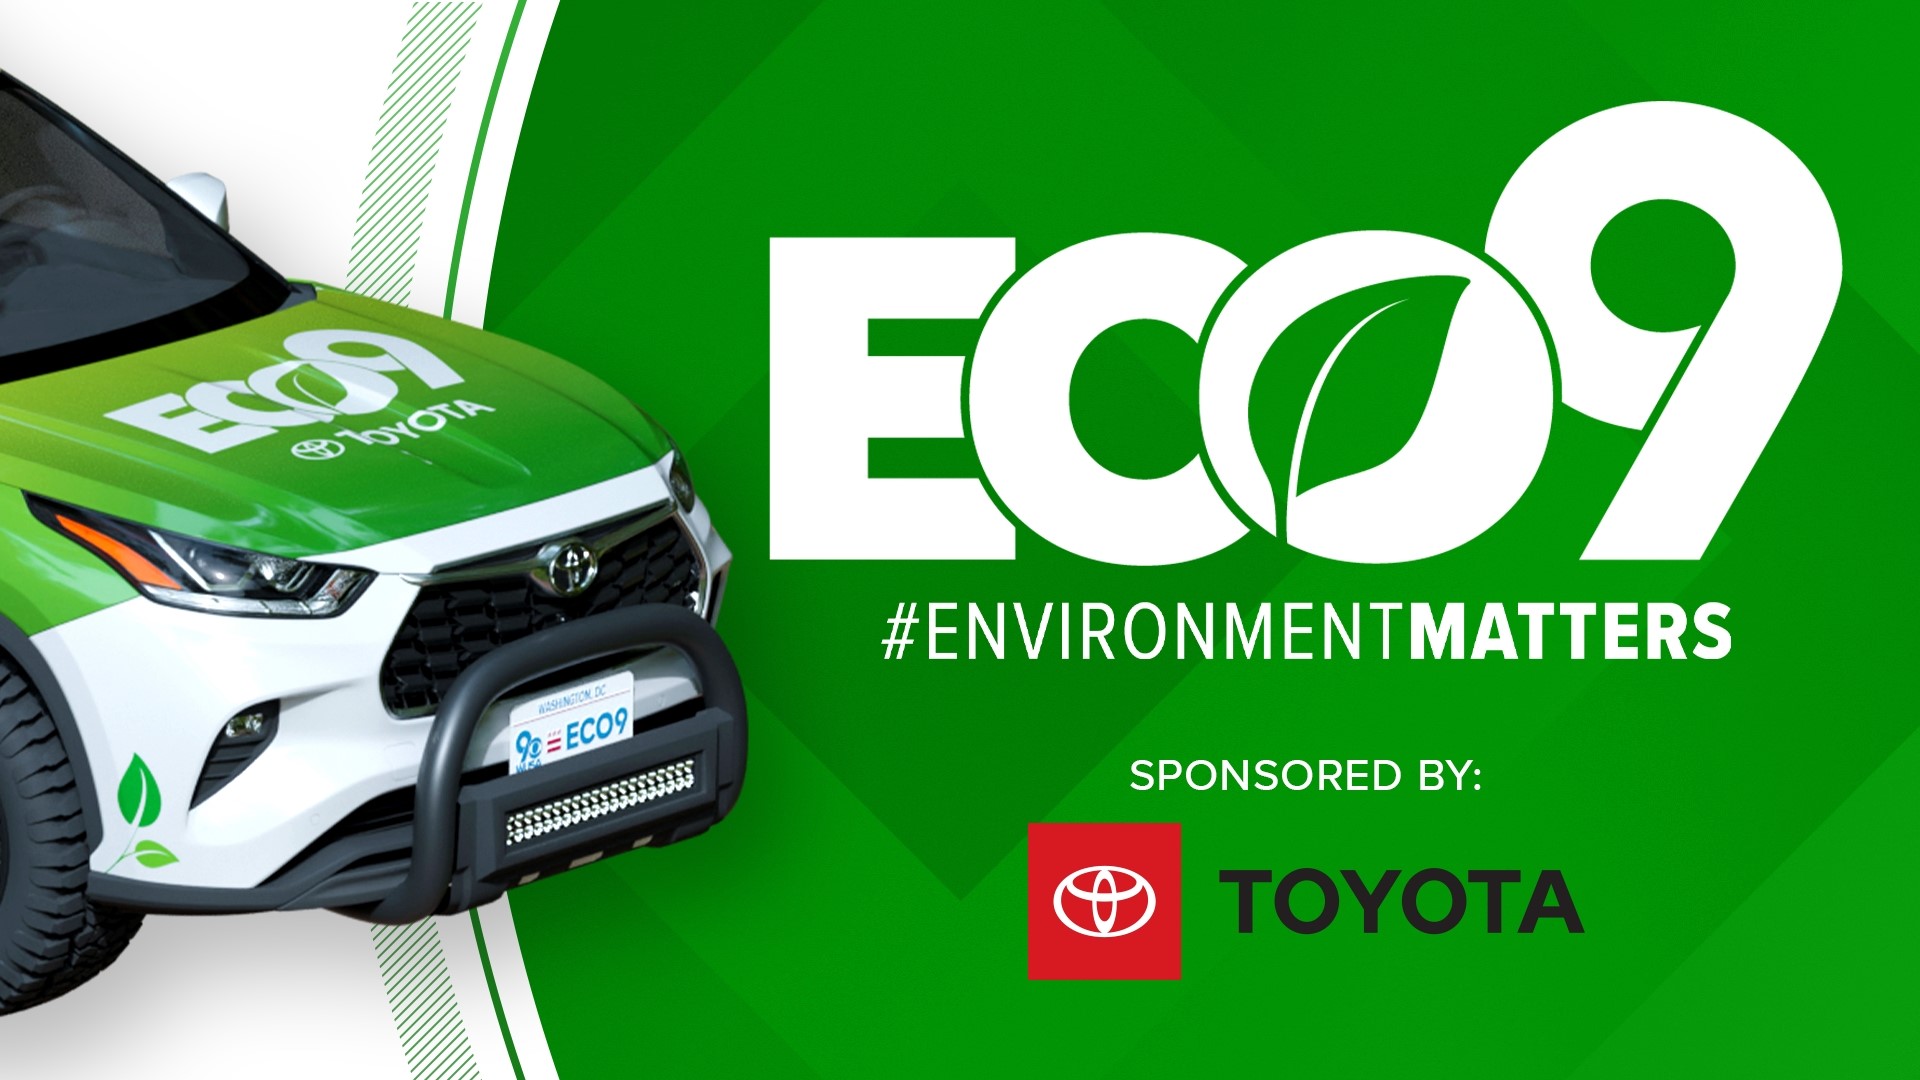 Here at WUSA9, we are committed to covering climate change. It's one of the reasons we've partnered with Toyota to engineer a first-of-its-kind eco-hybrid news car.